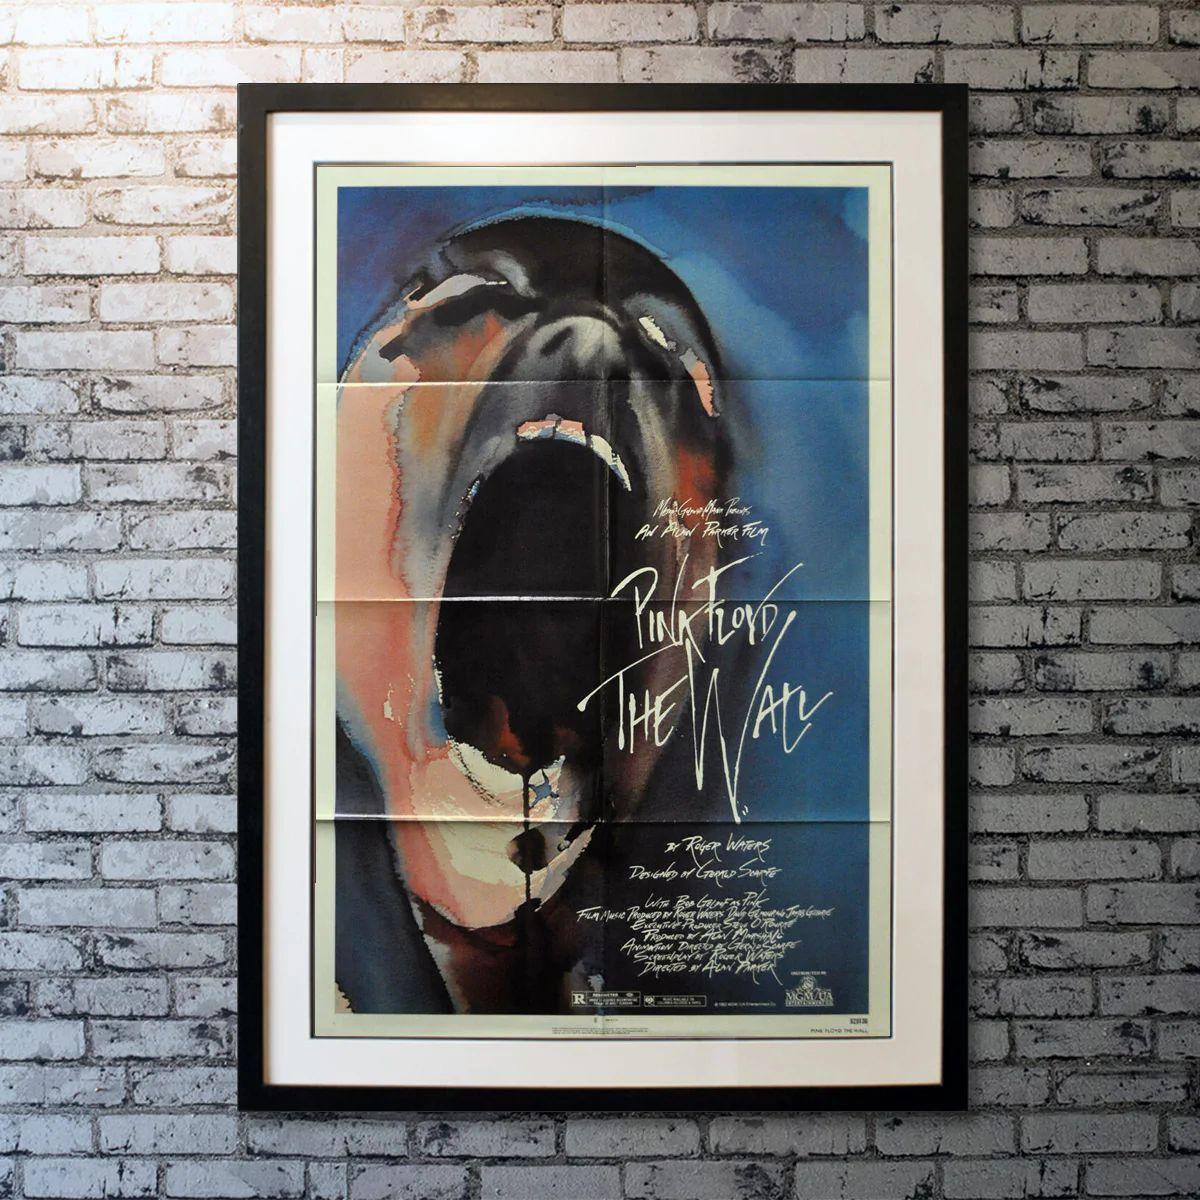 Pink Floyd: The Wall, unframed poster, 1982

A confined but troubled rock star descends into madness in the midst of his physical and social isolation from everyone.

Year: 1982
Nationality: United States
Condition: Folded
Type: original one